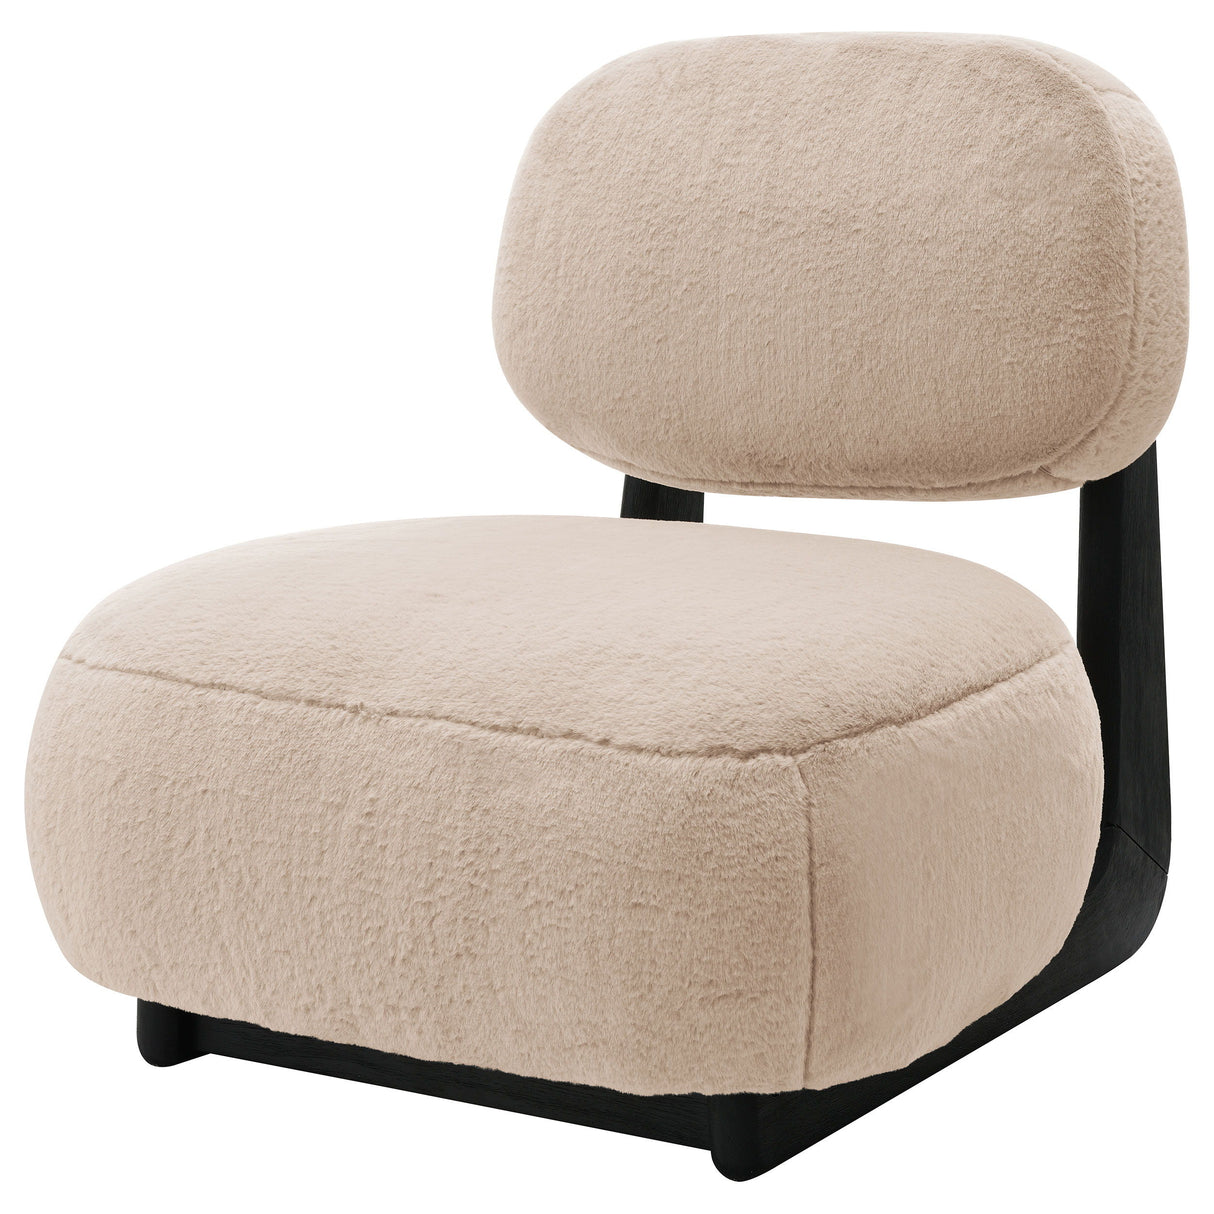 Duffie - Upholstered Armless Accent Chair - Camel